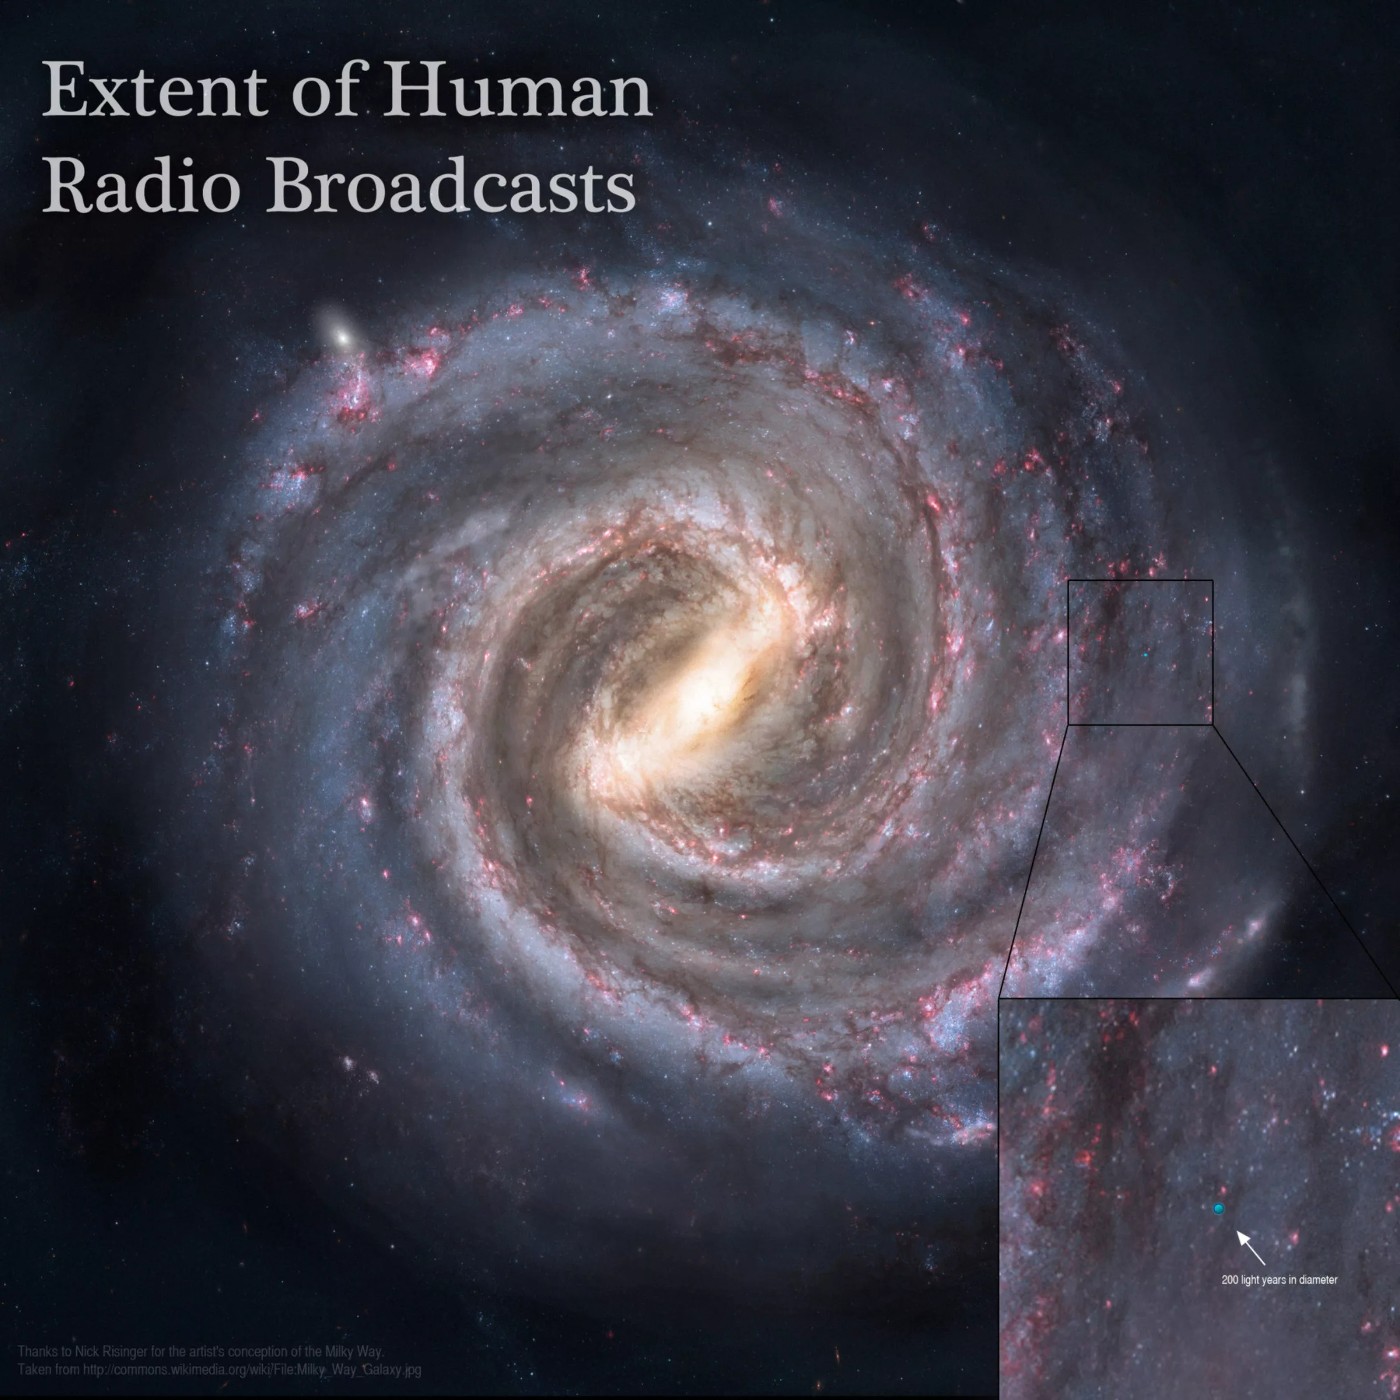 Extent of radio broadcasts in space